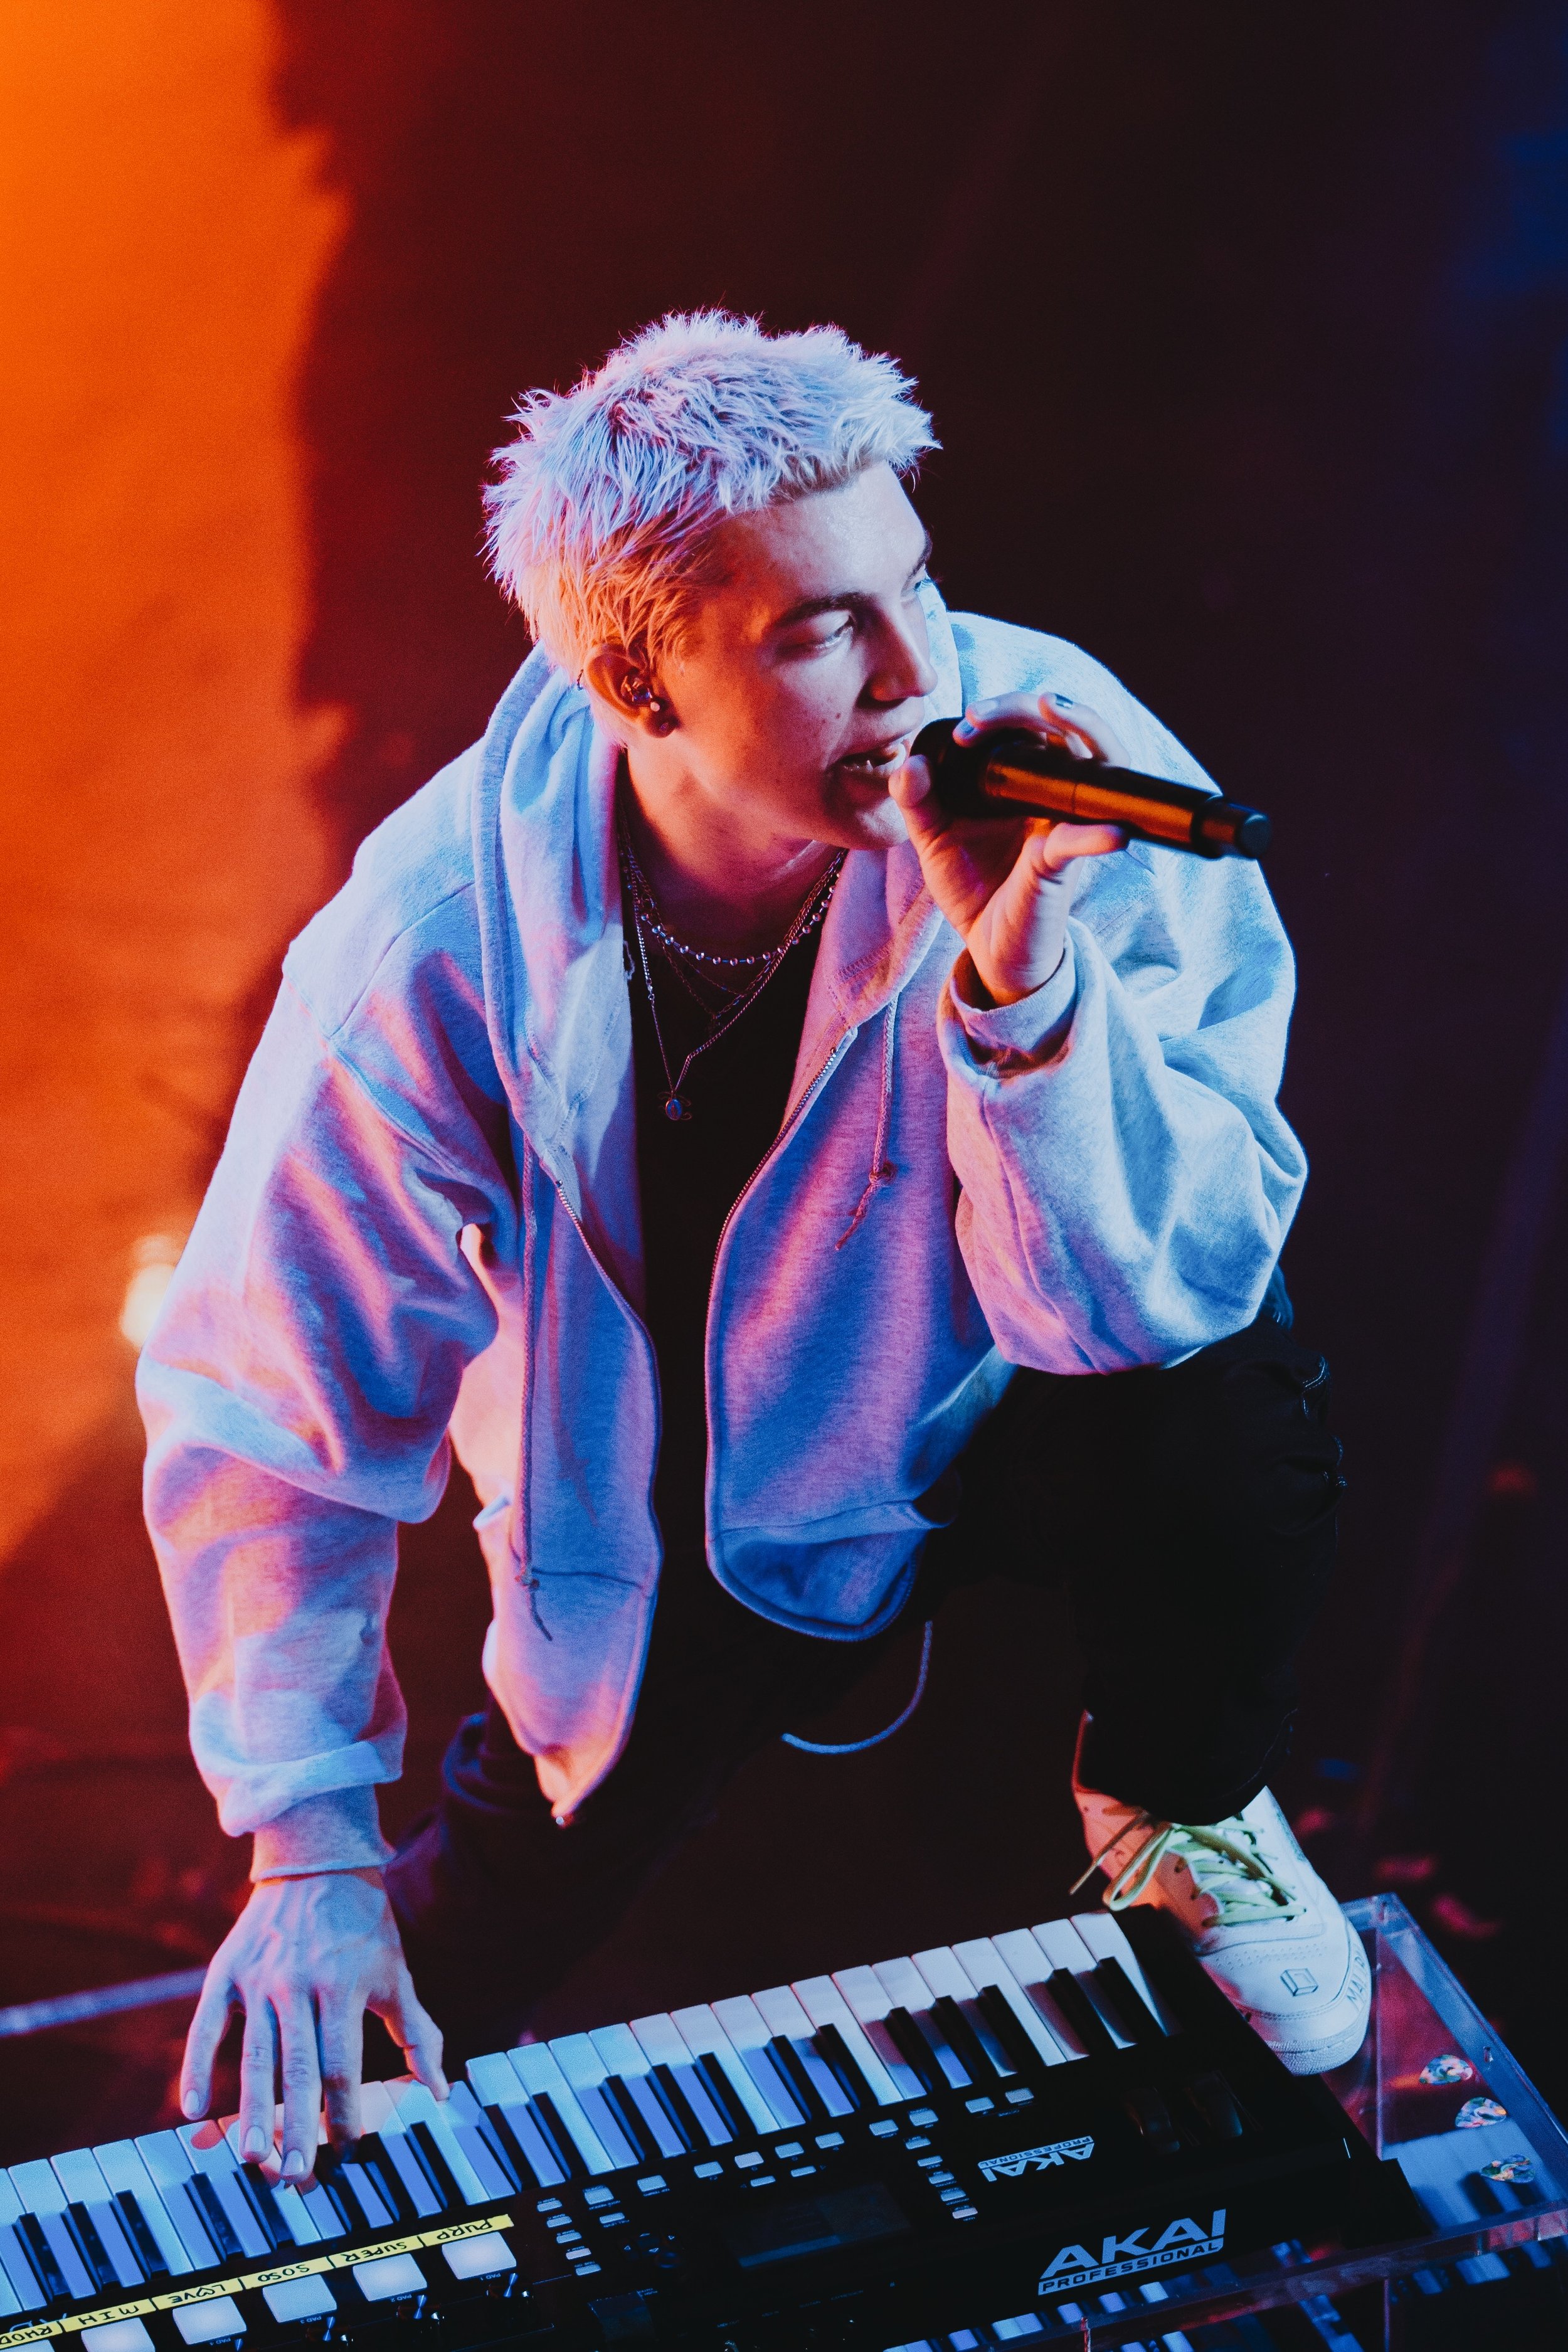 The Interscope signed indie pop band’s frontman performs onstage, drenched in sunset colored lights. One hand clenches a microphone while the other plays a chord on the Akai keyboard in front of him. He plants one foot on the ground, while the other is adjacent to the keyboard. This is reminiscent of his carefully crafted ‘cool boy’ aesthetic.